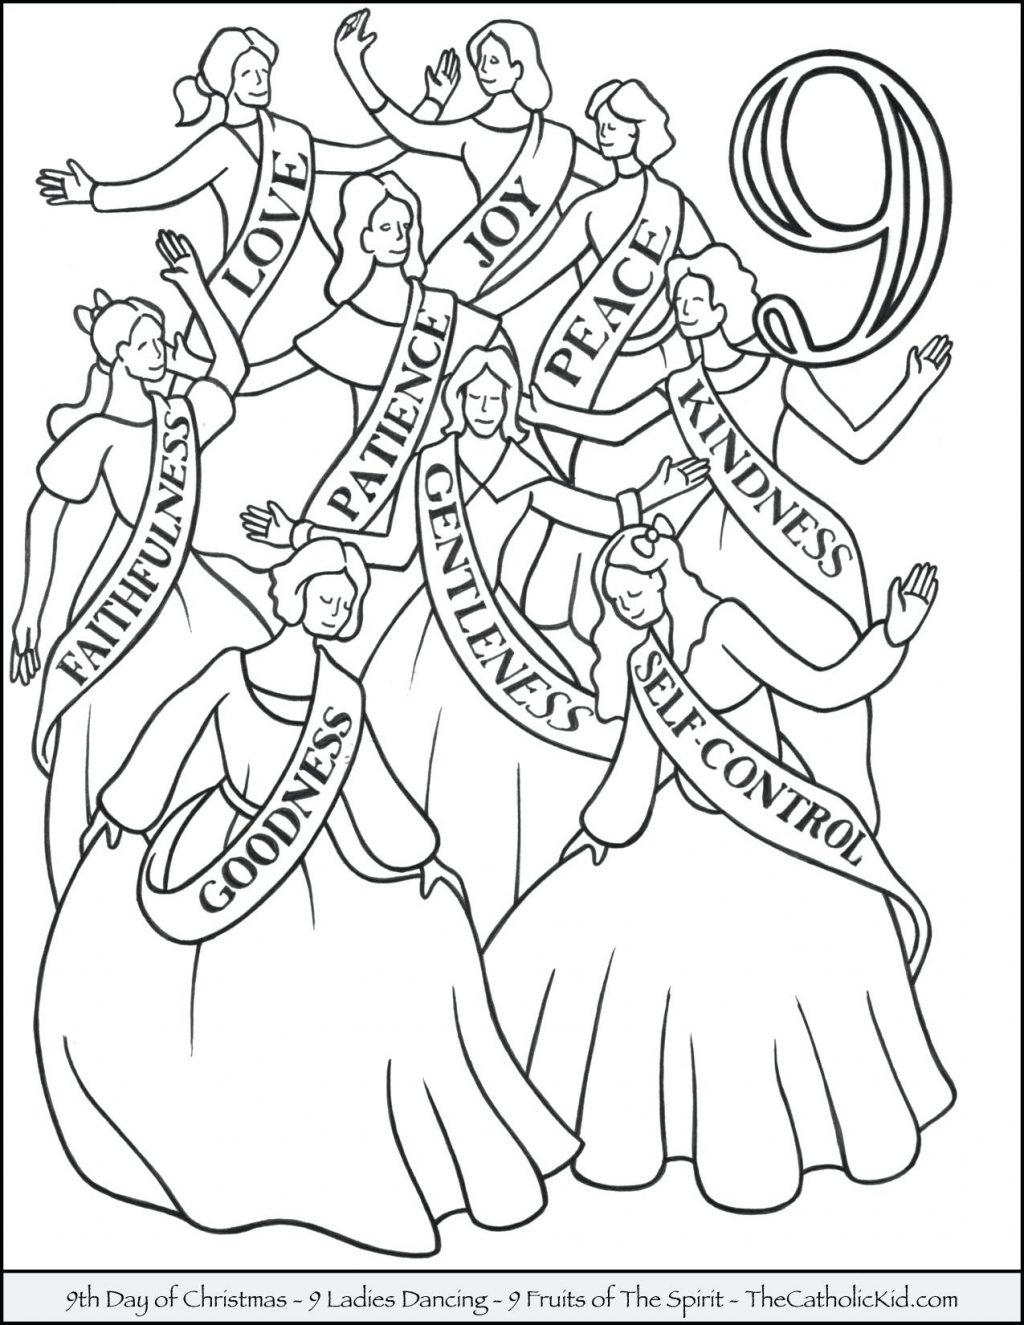 12 Days Of Christmas Coloring Pages at Free